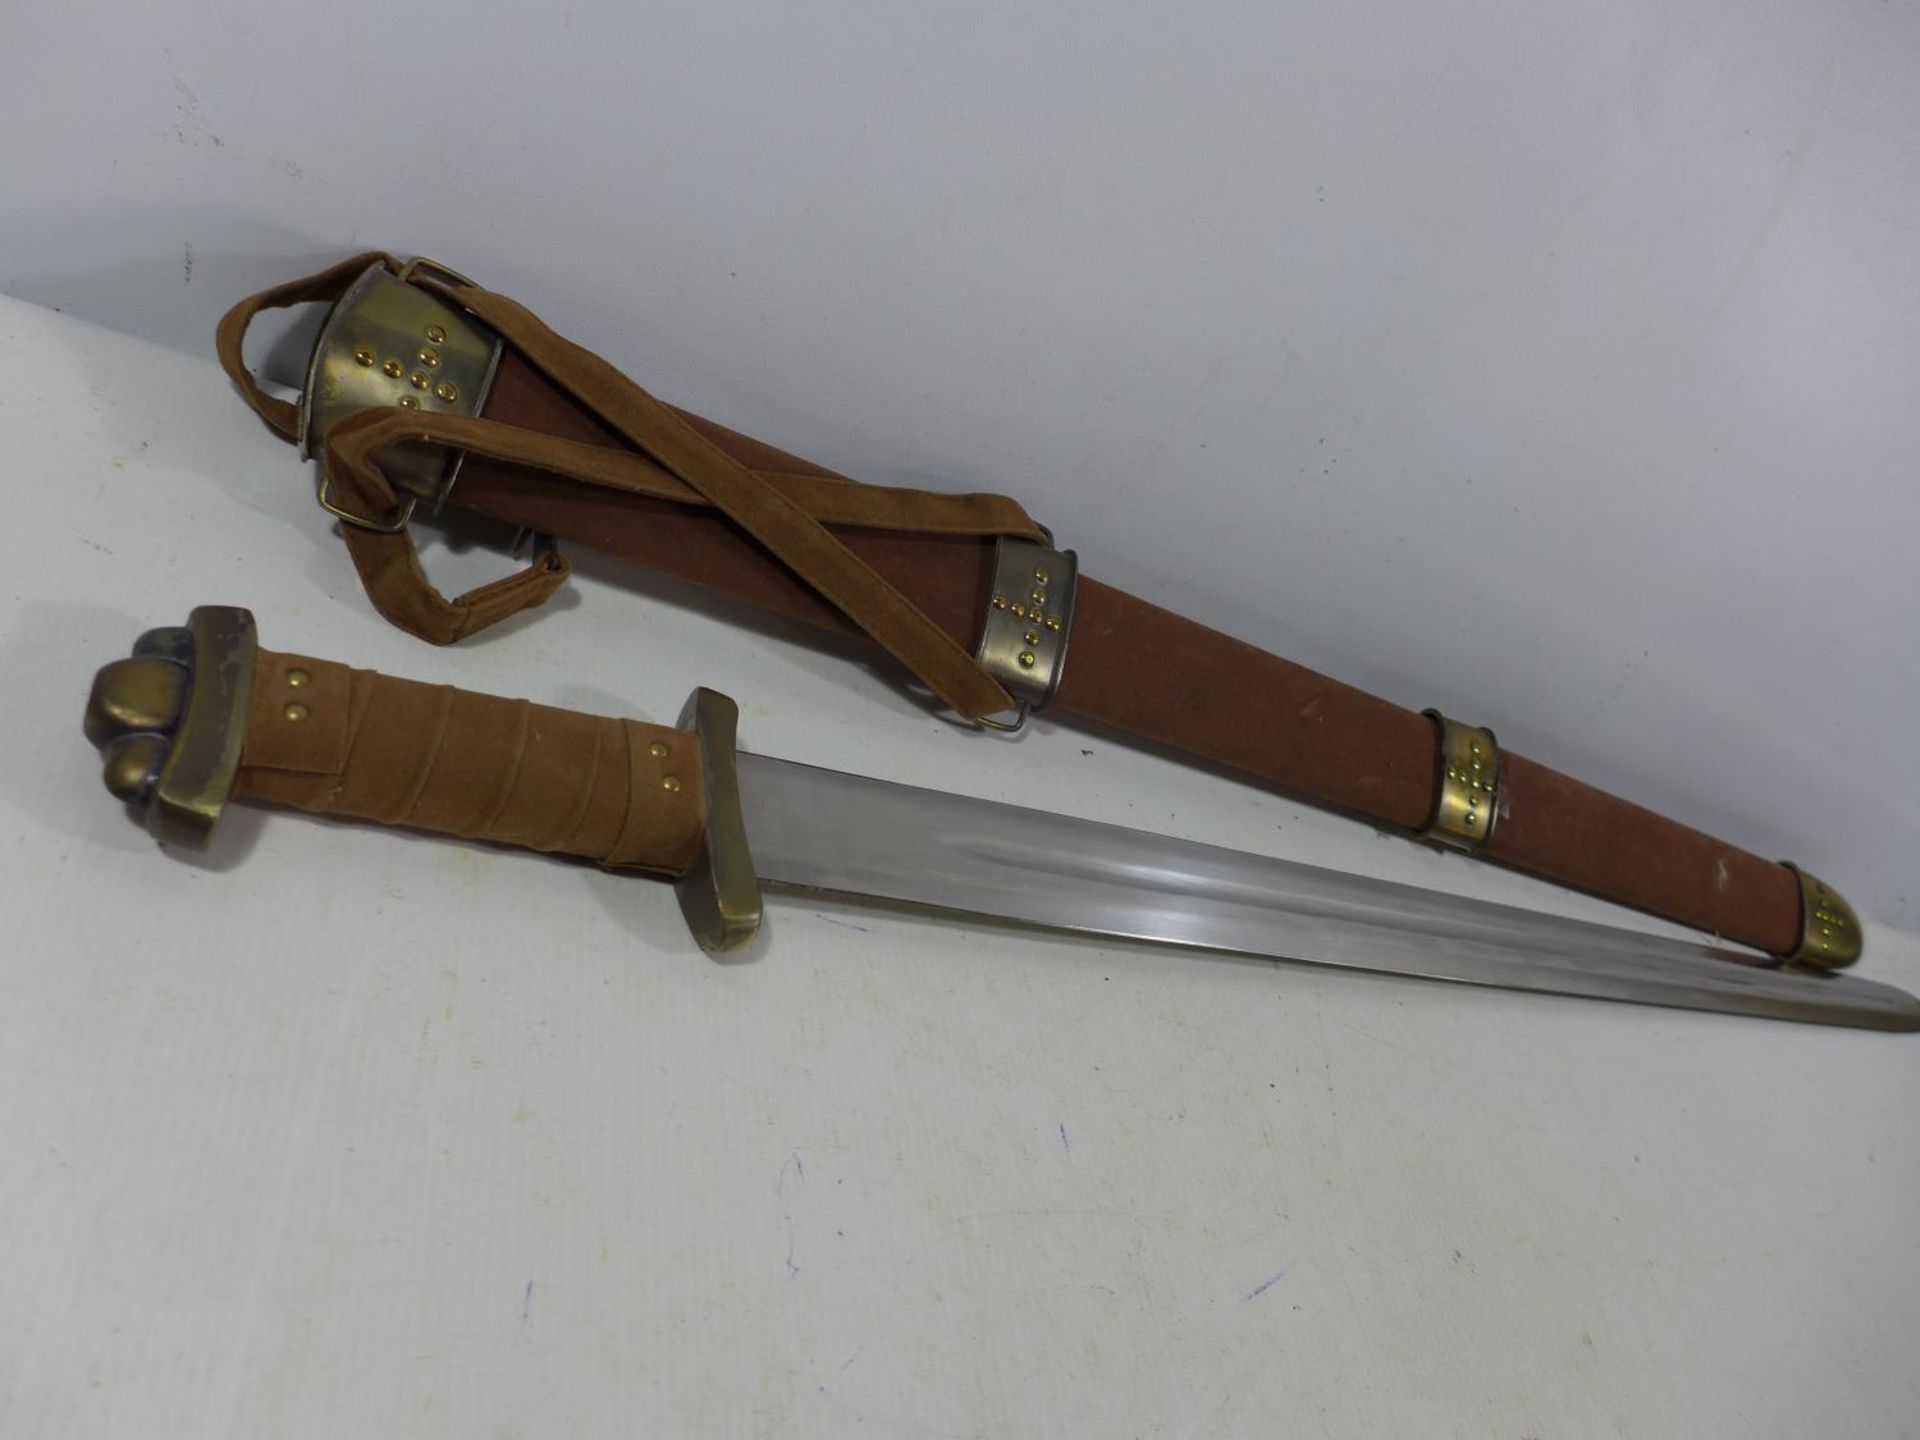 A GOOD QUALITY MODERN DISPLAY VIKING SWORD AND SCABBARD, 73CM BLADE, LENGTH 94CM - Image 2 of 4